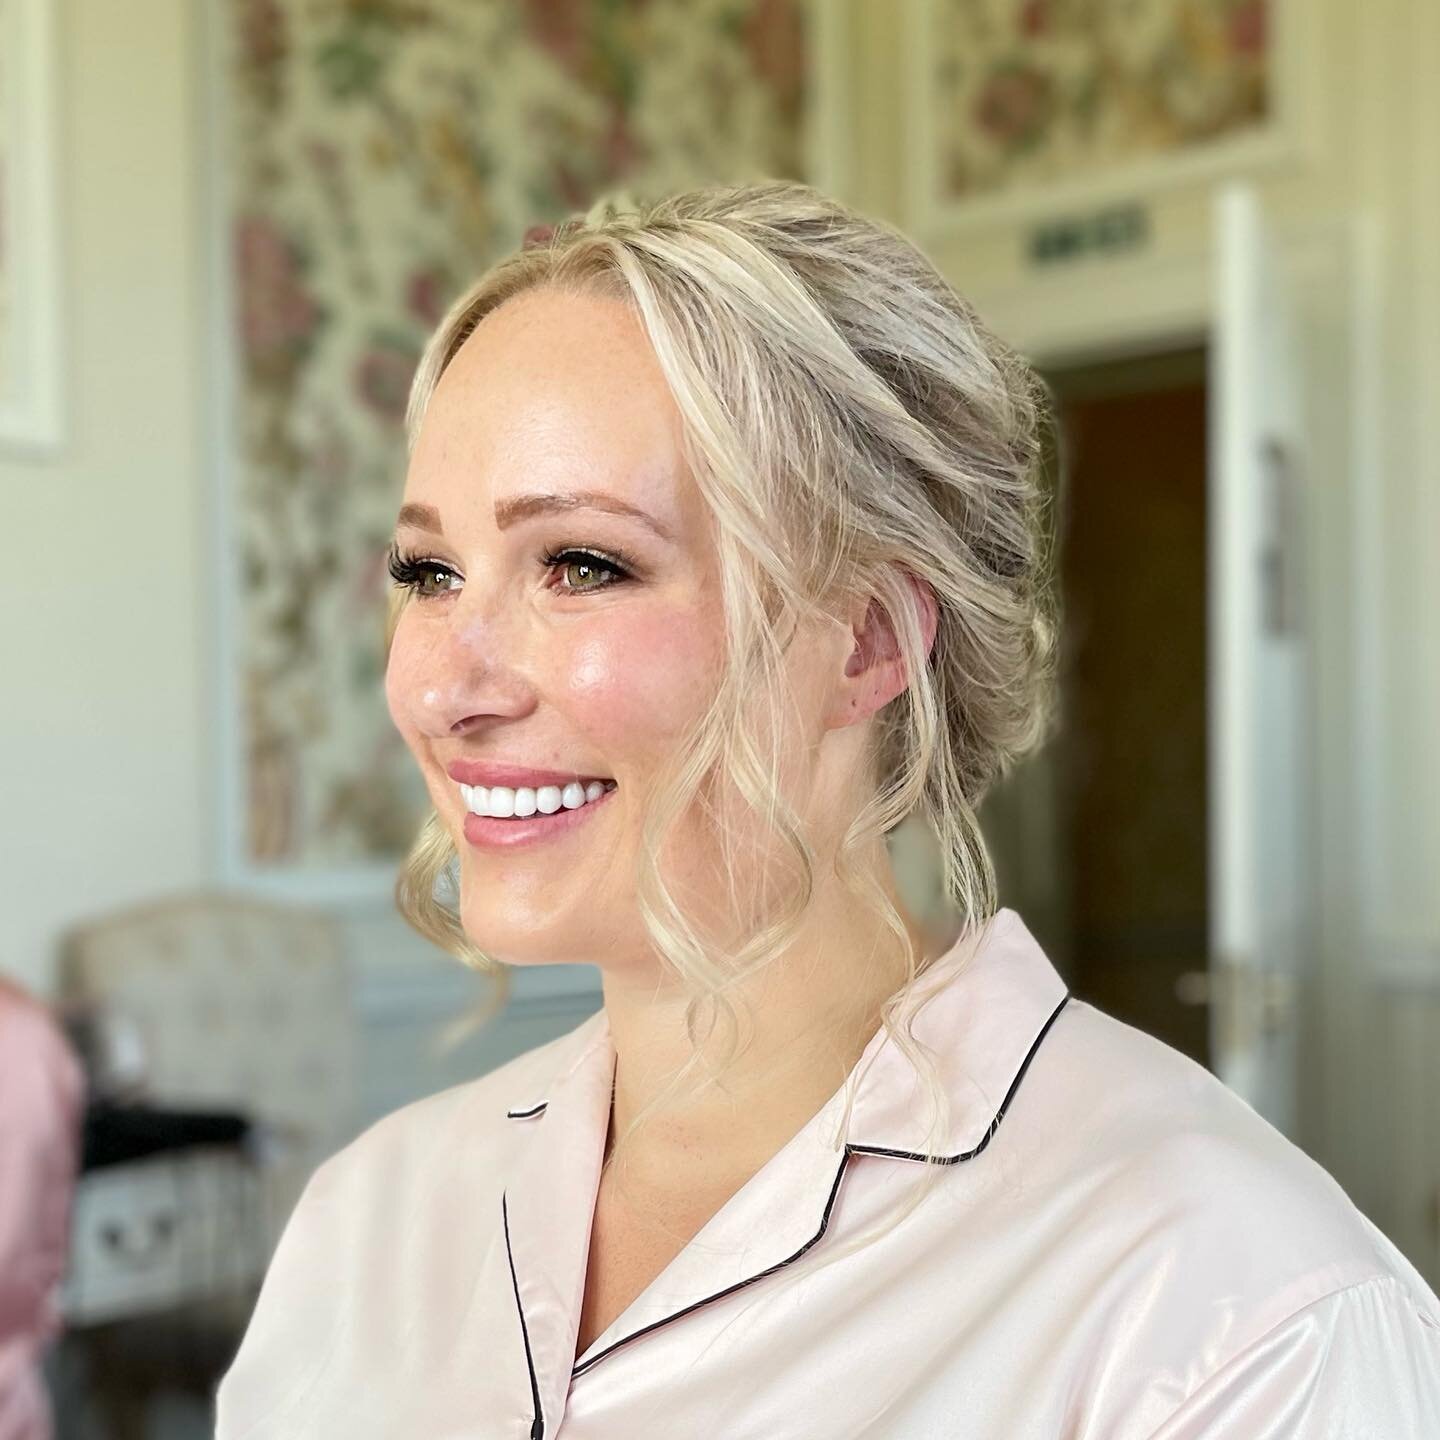 BRIDESMAIDS // one of Claires beautiful bridesmaids for her incredible wedding at @hedsor. Using a range of Charlotte Tilbury and Tom Ford products I created this glowing makeup which is an absolute favourite for our clients. Carla x
-
-
Hair Directo